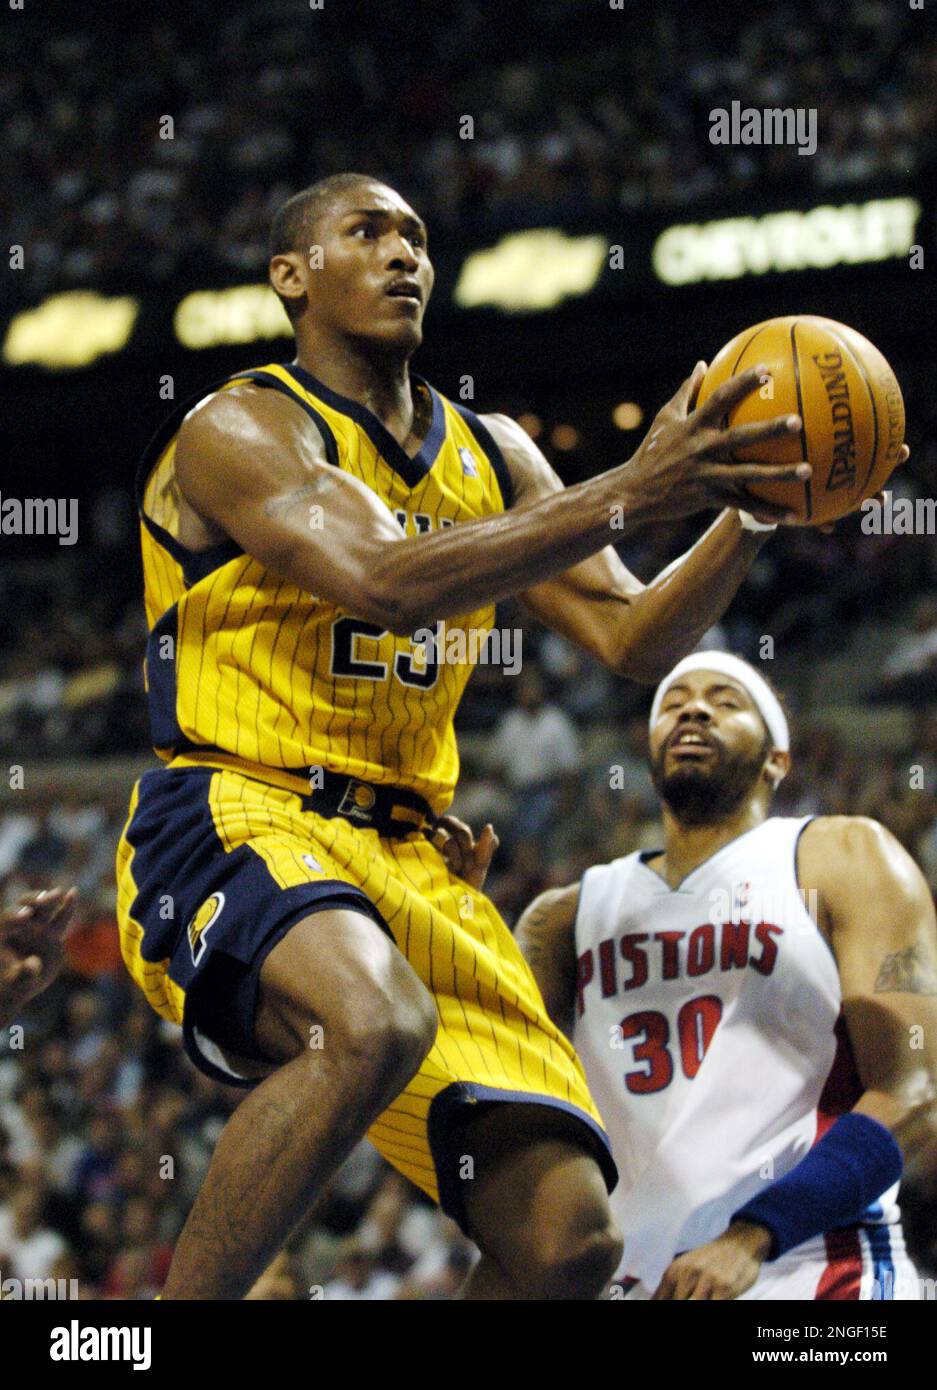 Indiana Pacers forward Ron Artest (91) makes a move with the